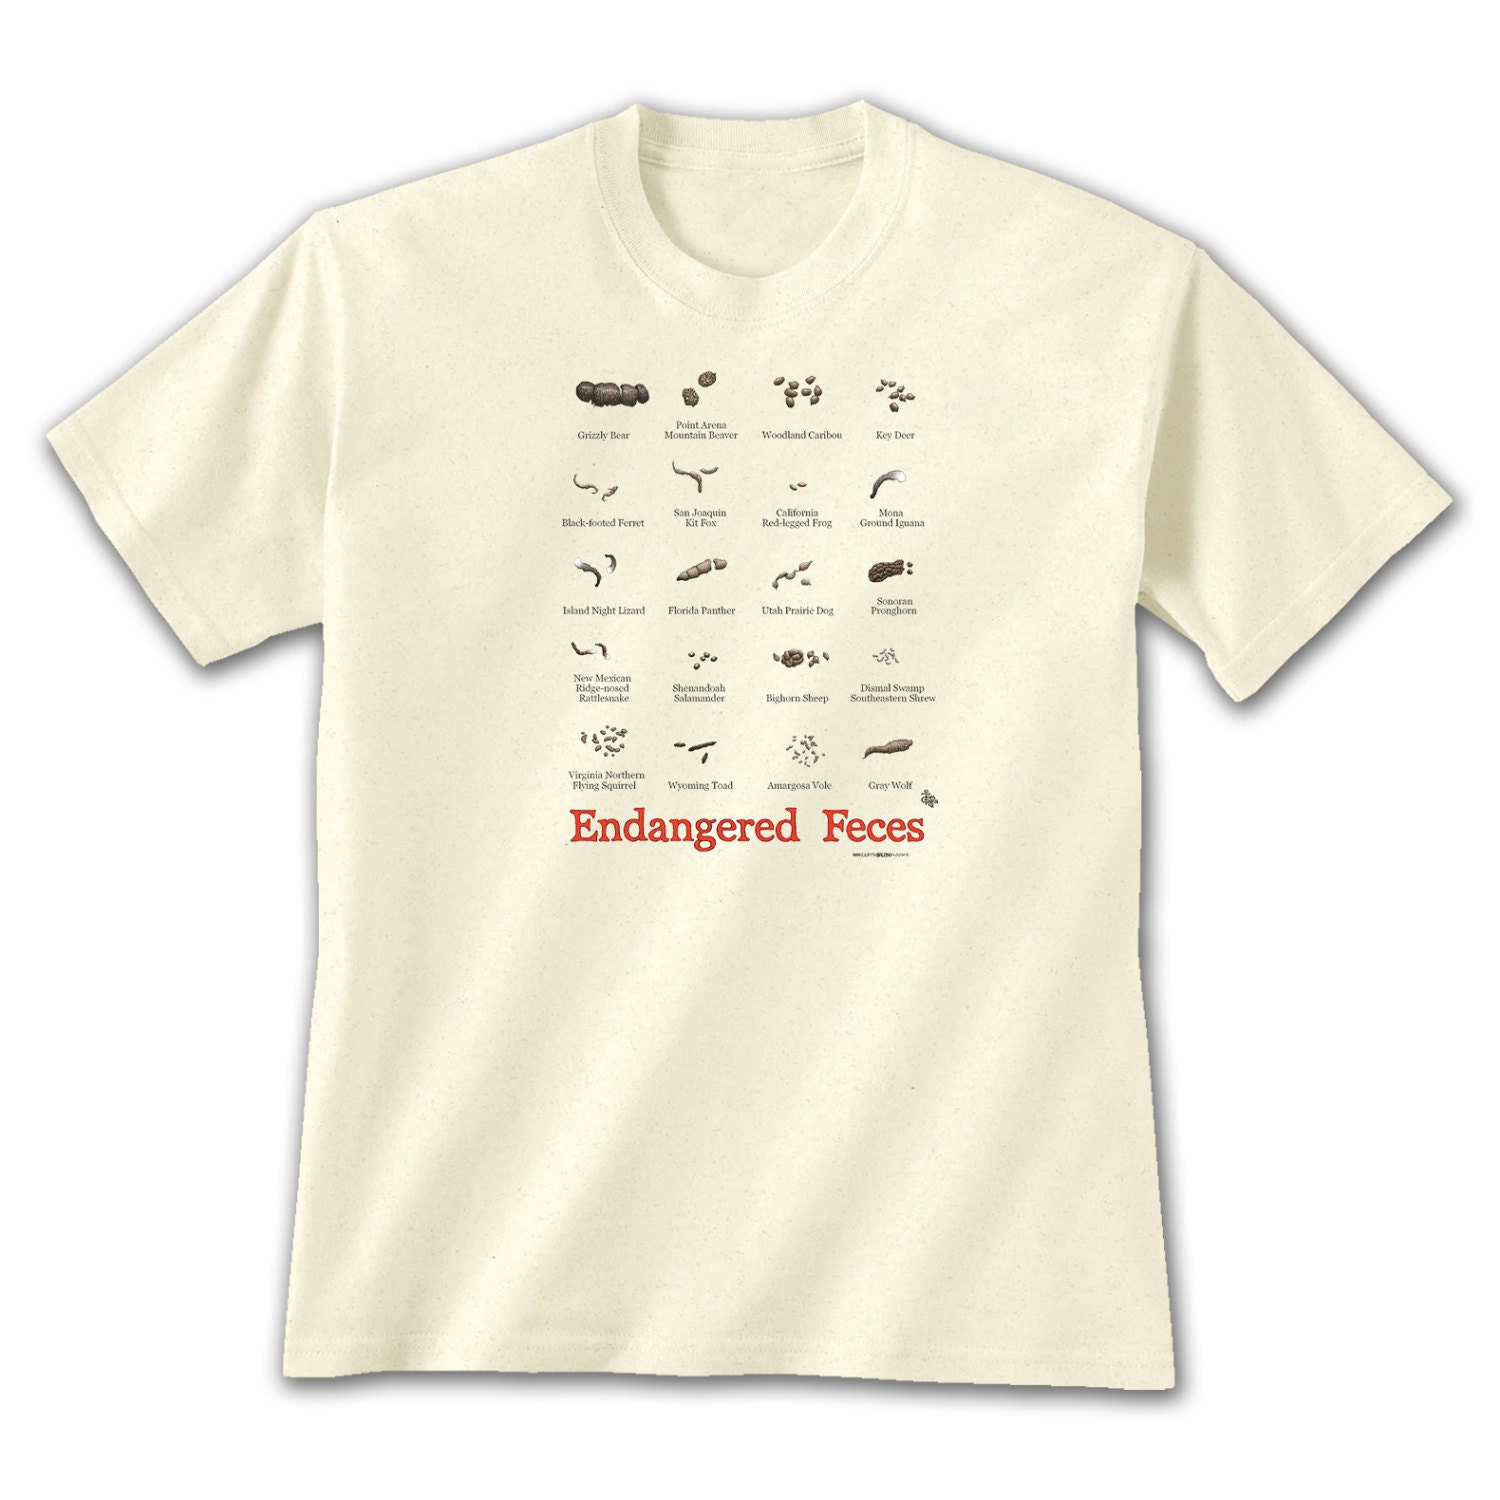 Endangered Feces T-Shirt Humor and Scientific Accuracy Outdoor